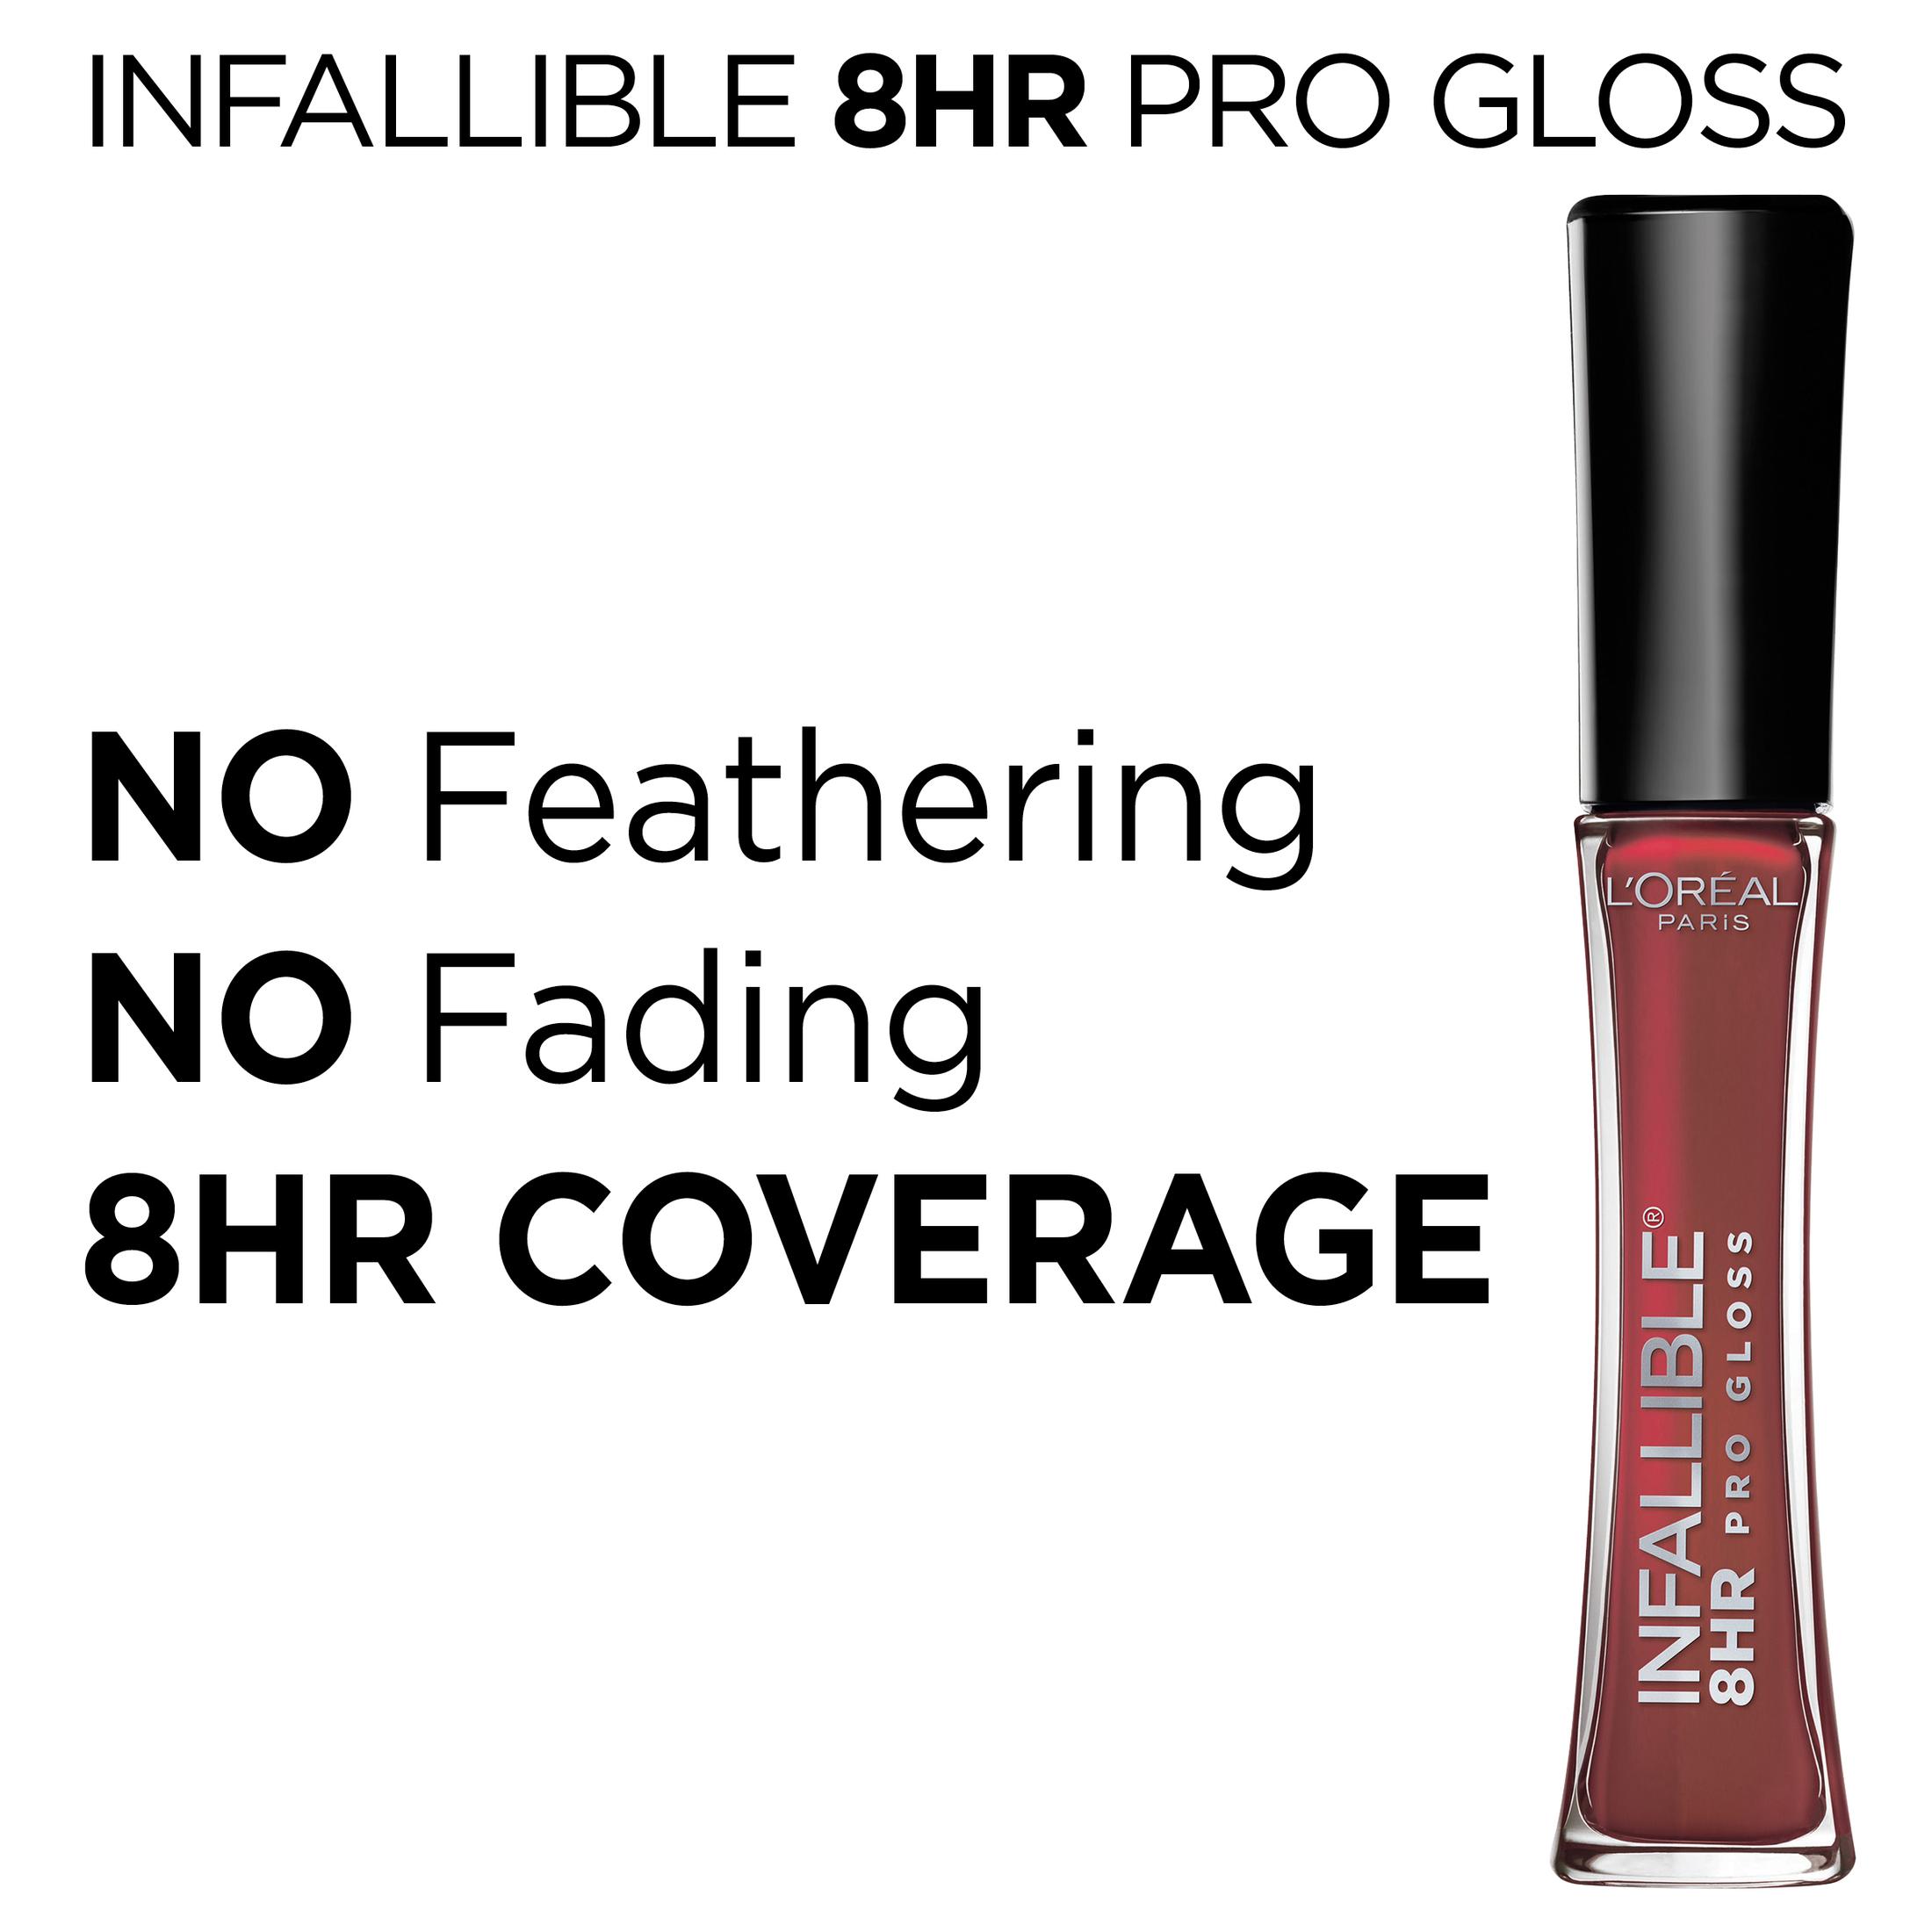 L'Oreal Paris Infallible 8 Hour Pro Hydrating Lip Gloss, Blush - image 5 of 5